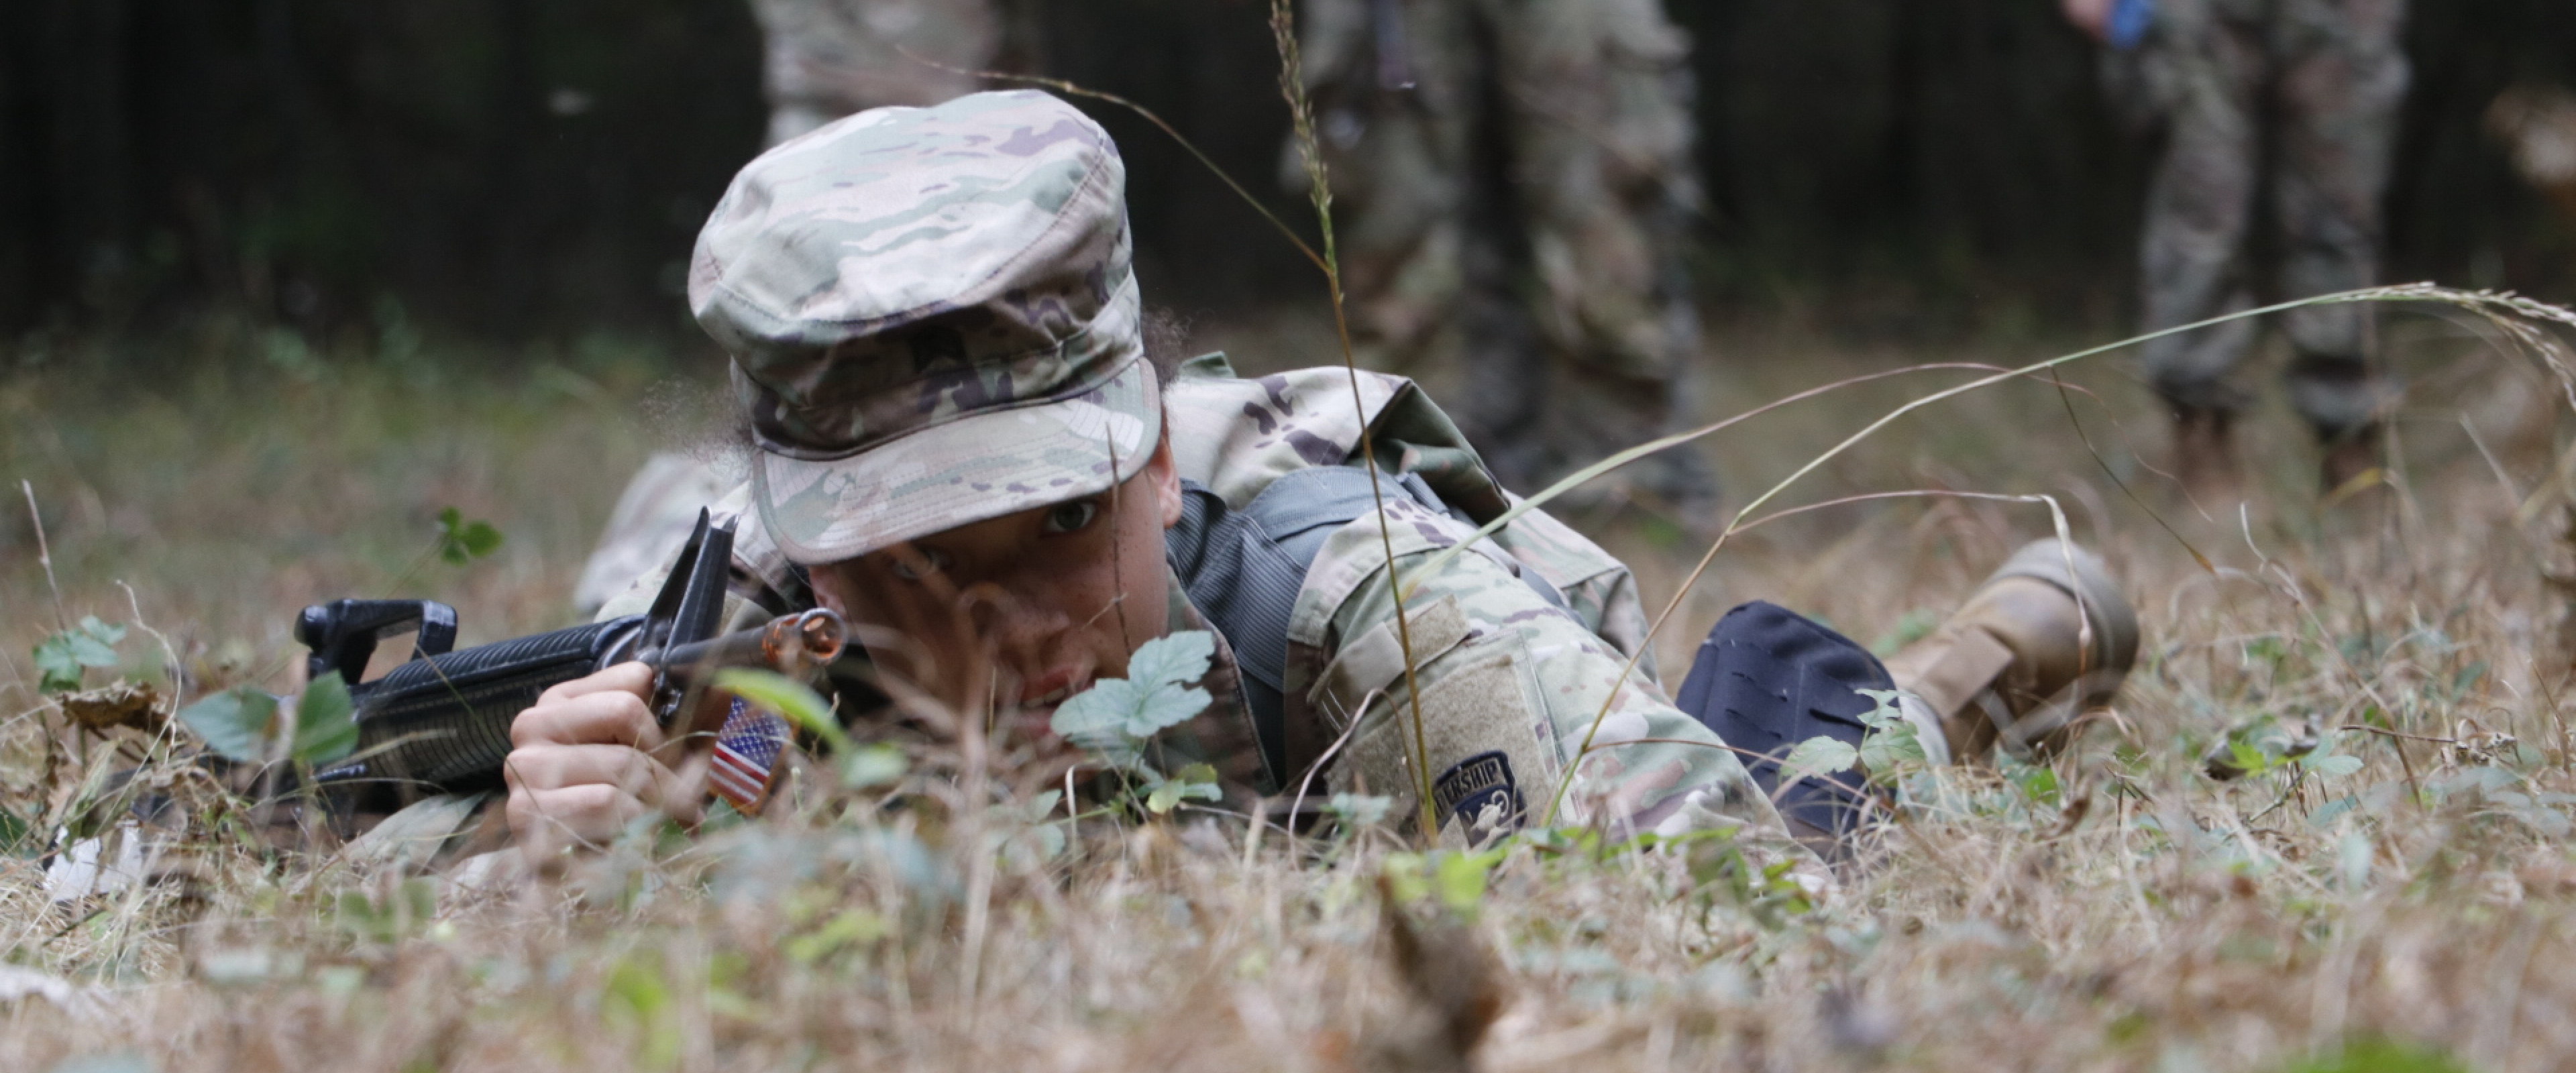 Female cadet low crawling during field training exercise